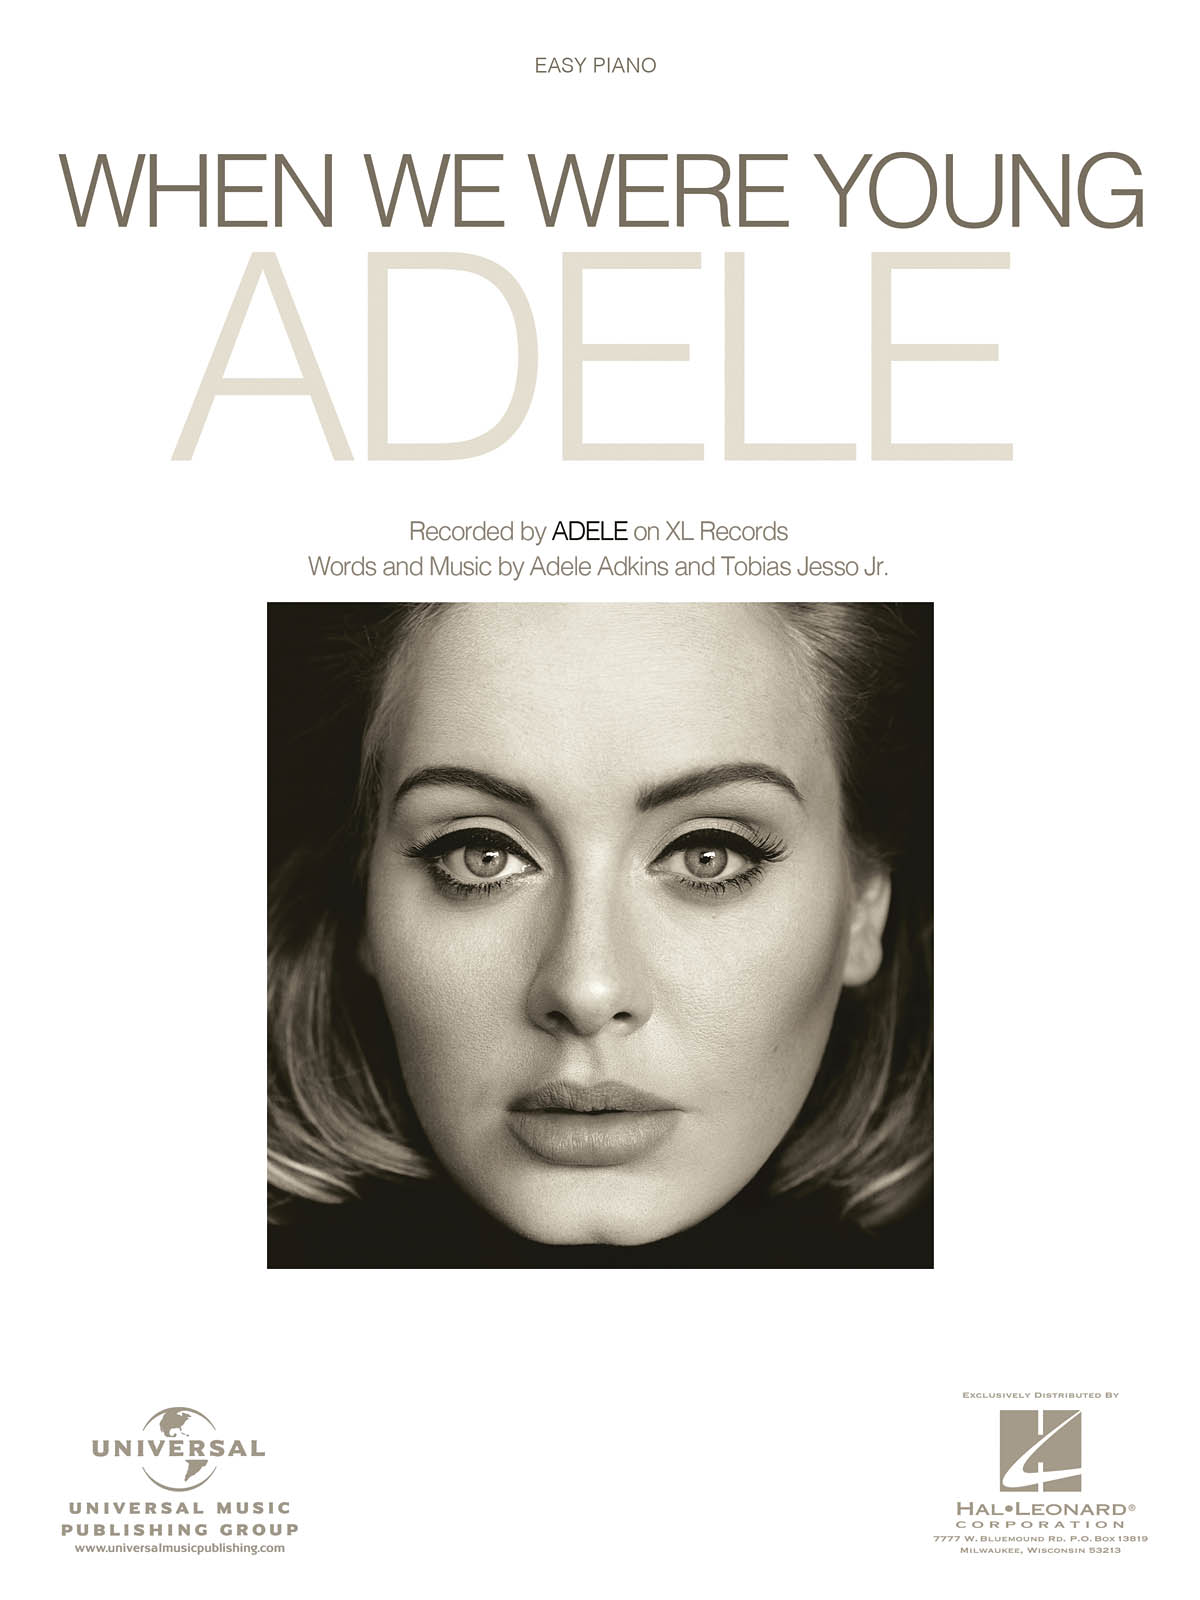 Adele: When We Were Young (Easy Piano)